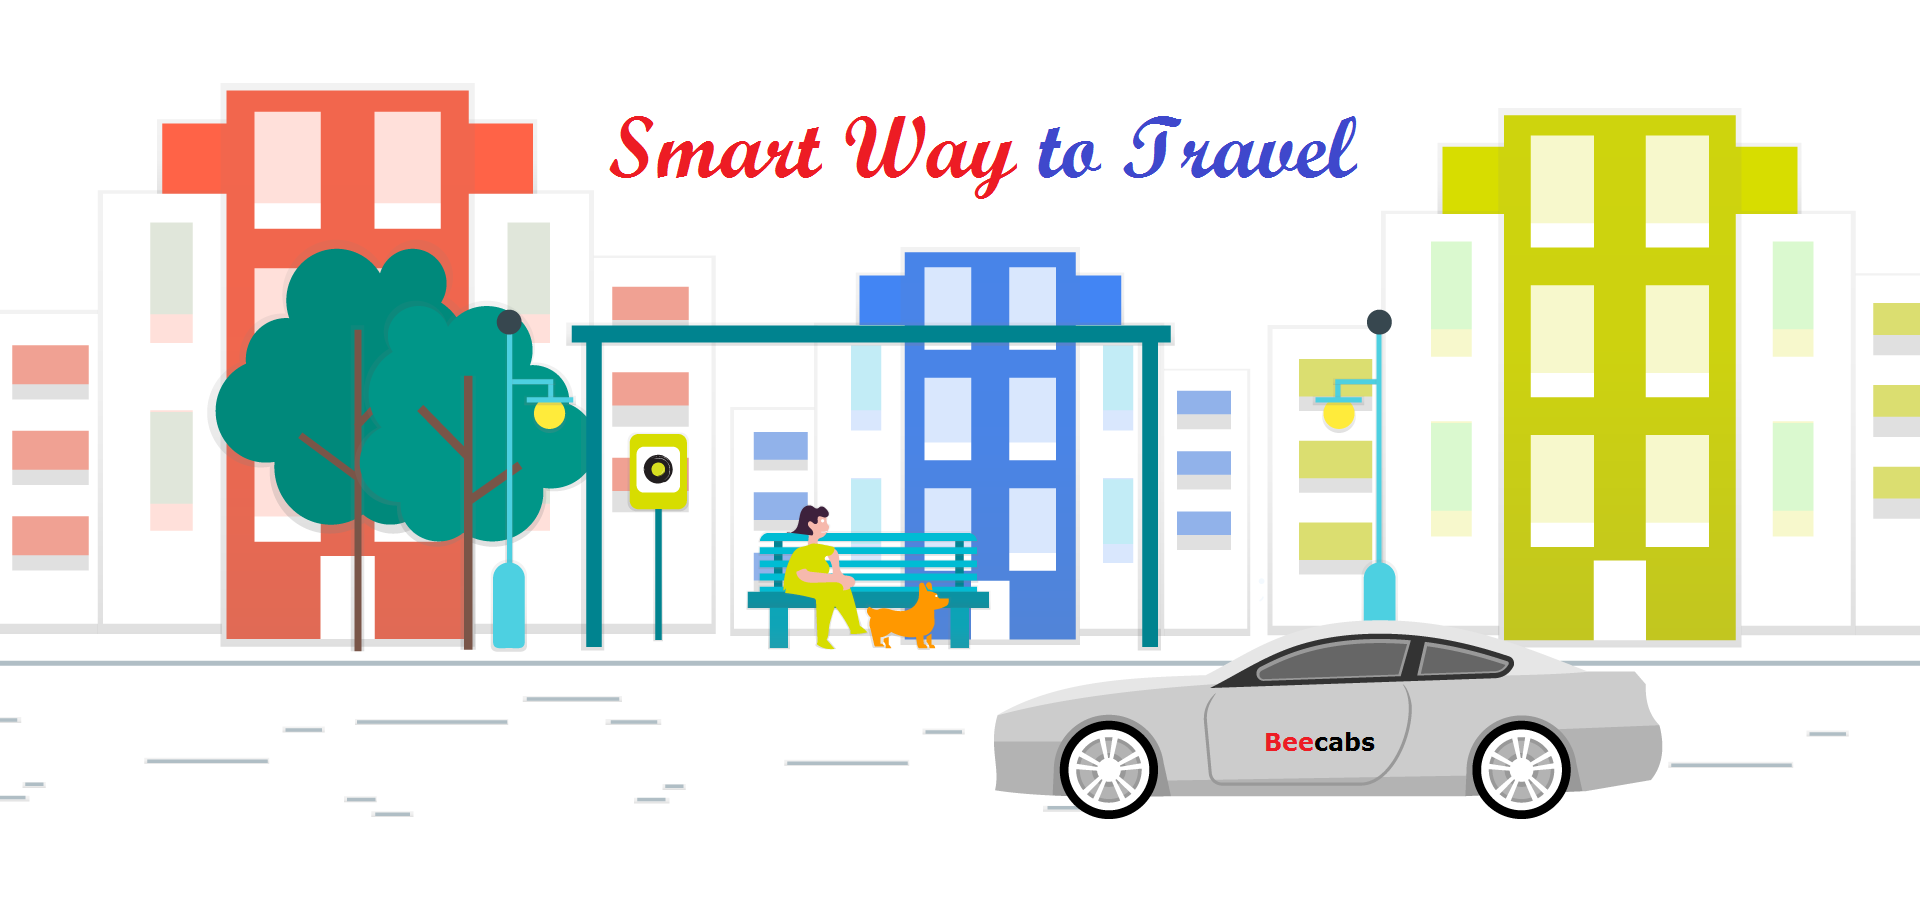 SmartWay to Travel - Beecabs.jpg.png  by beecabs